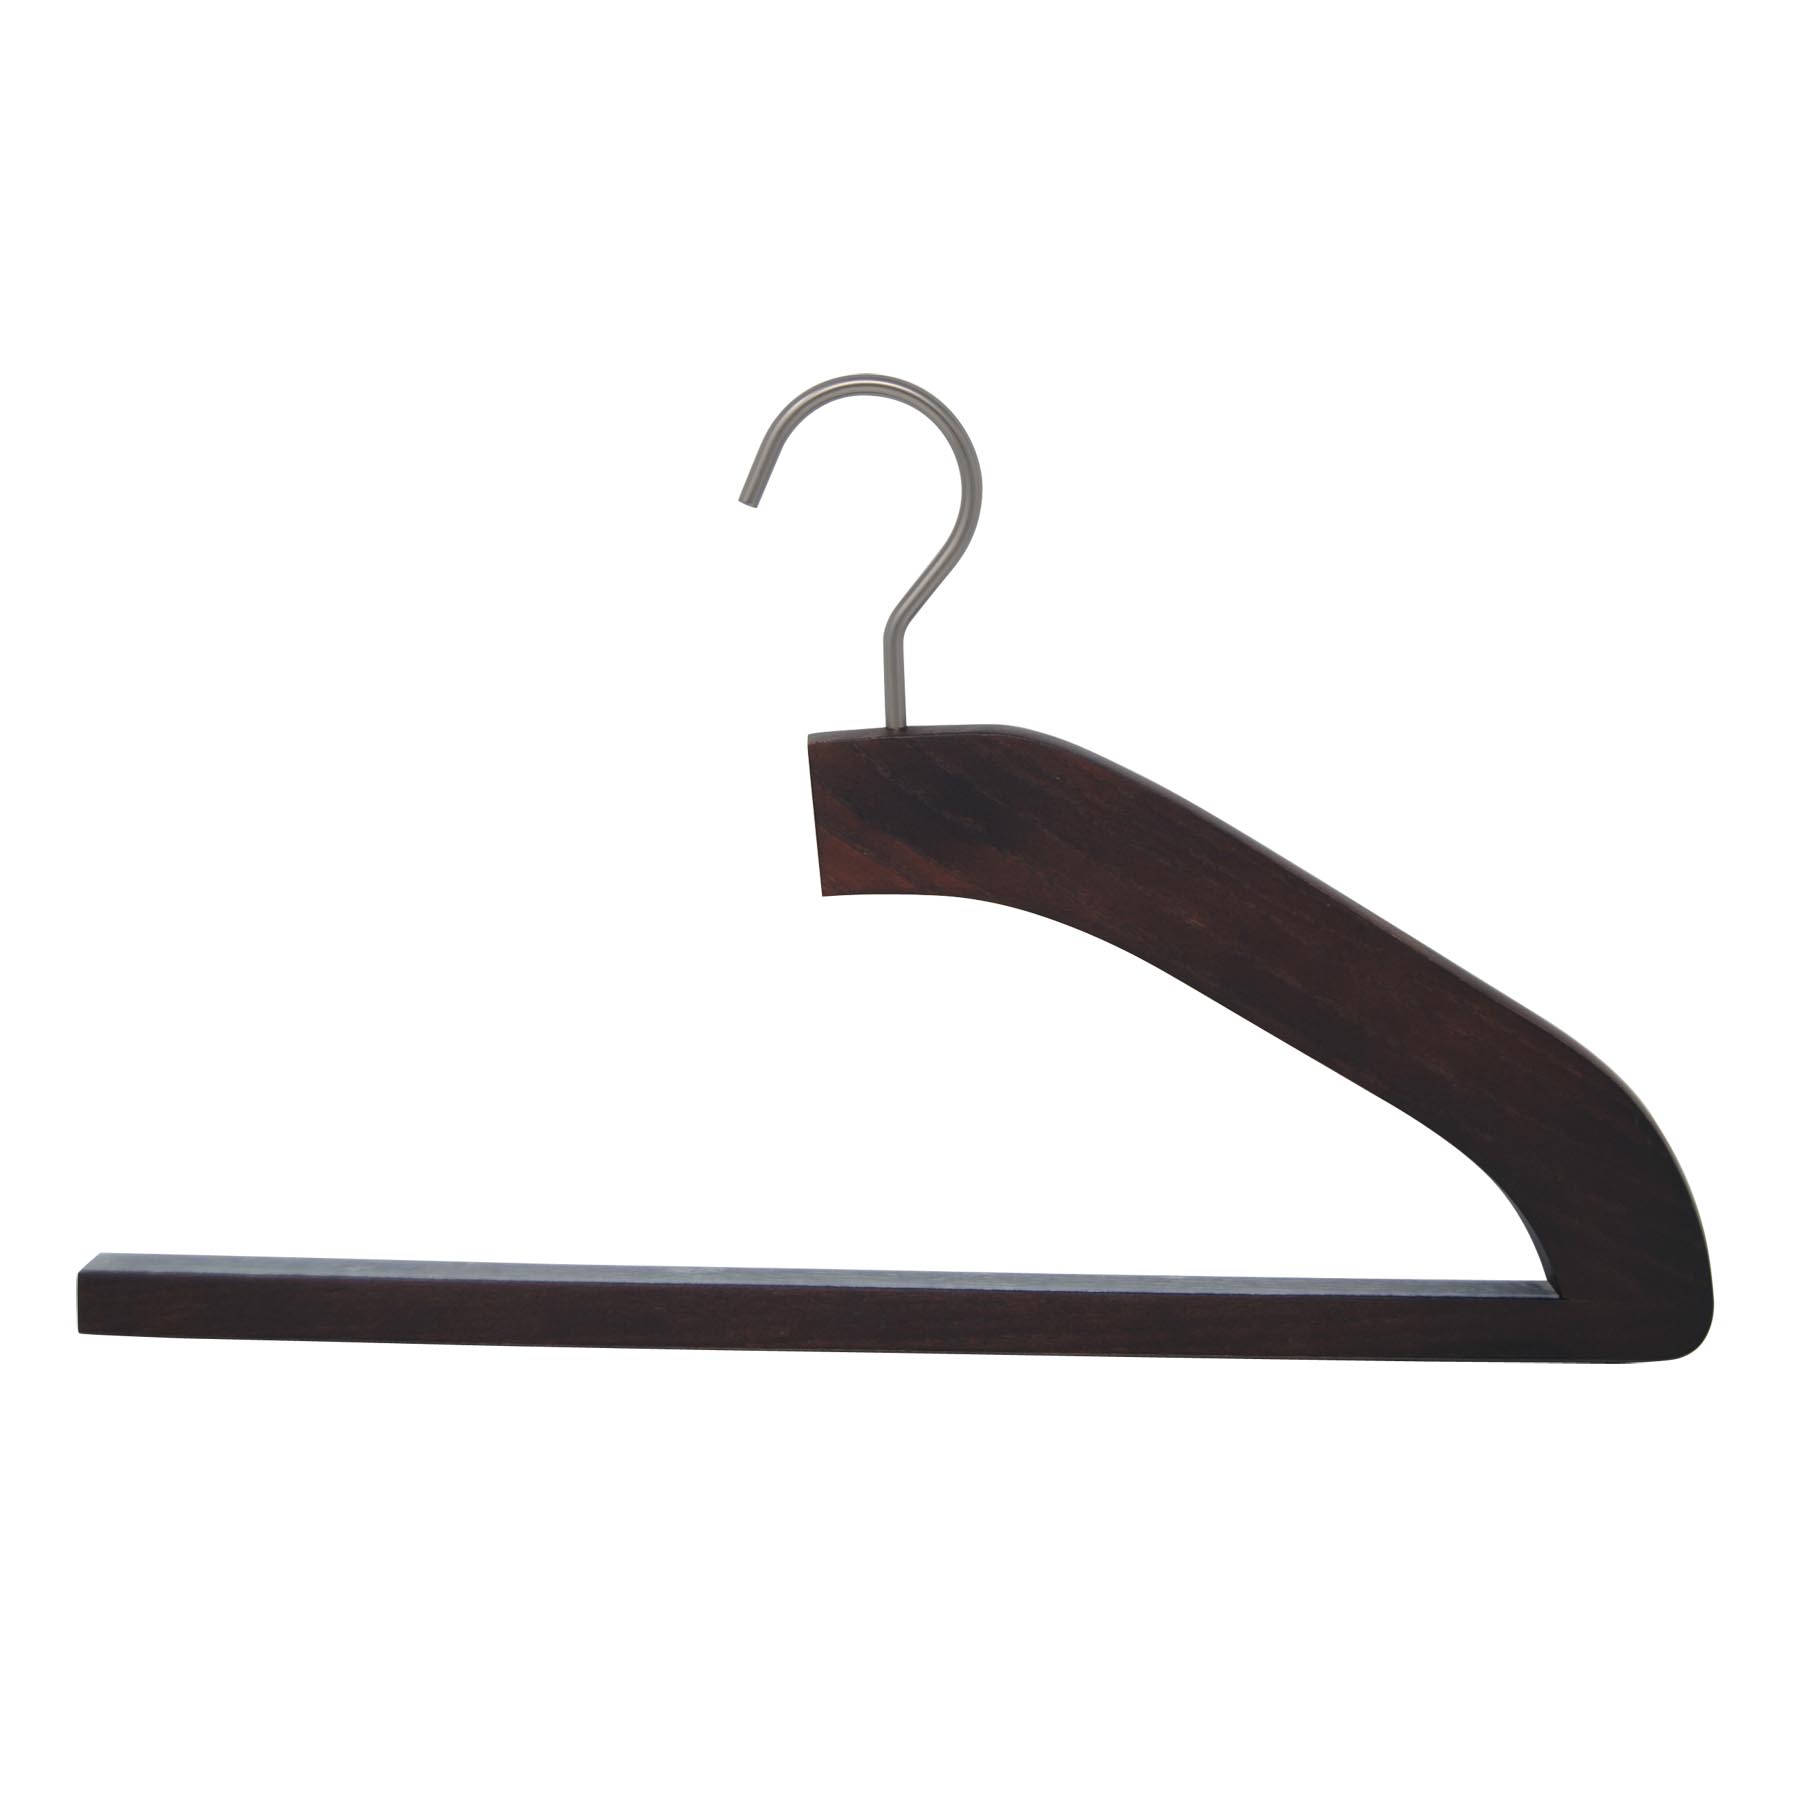 10 wooden hangers for trousers - walnut color